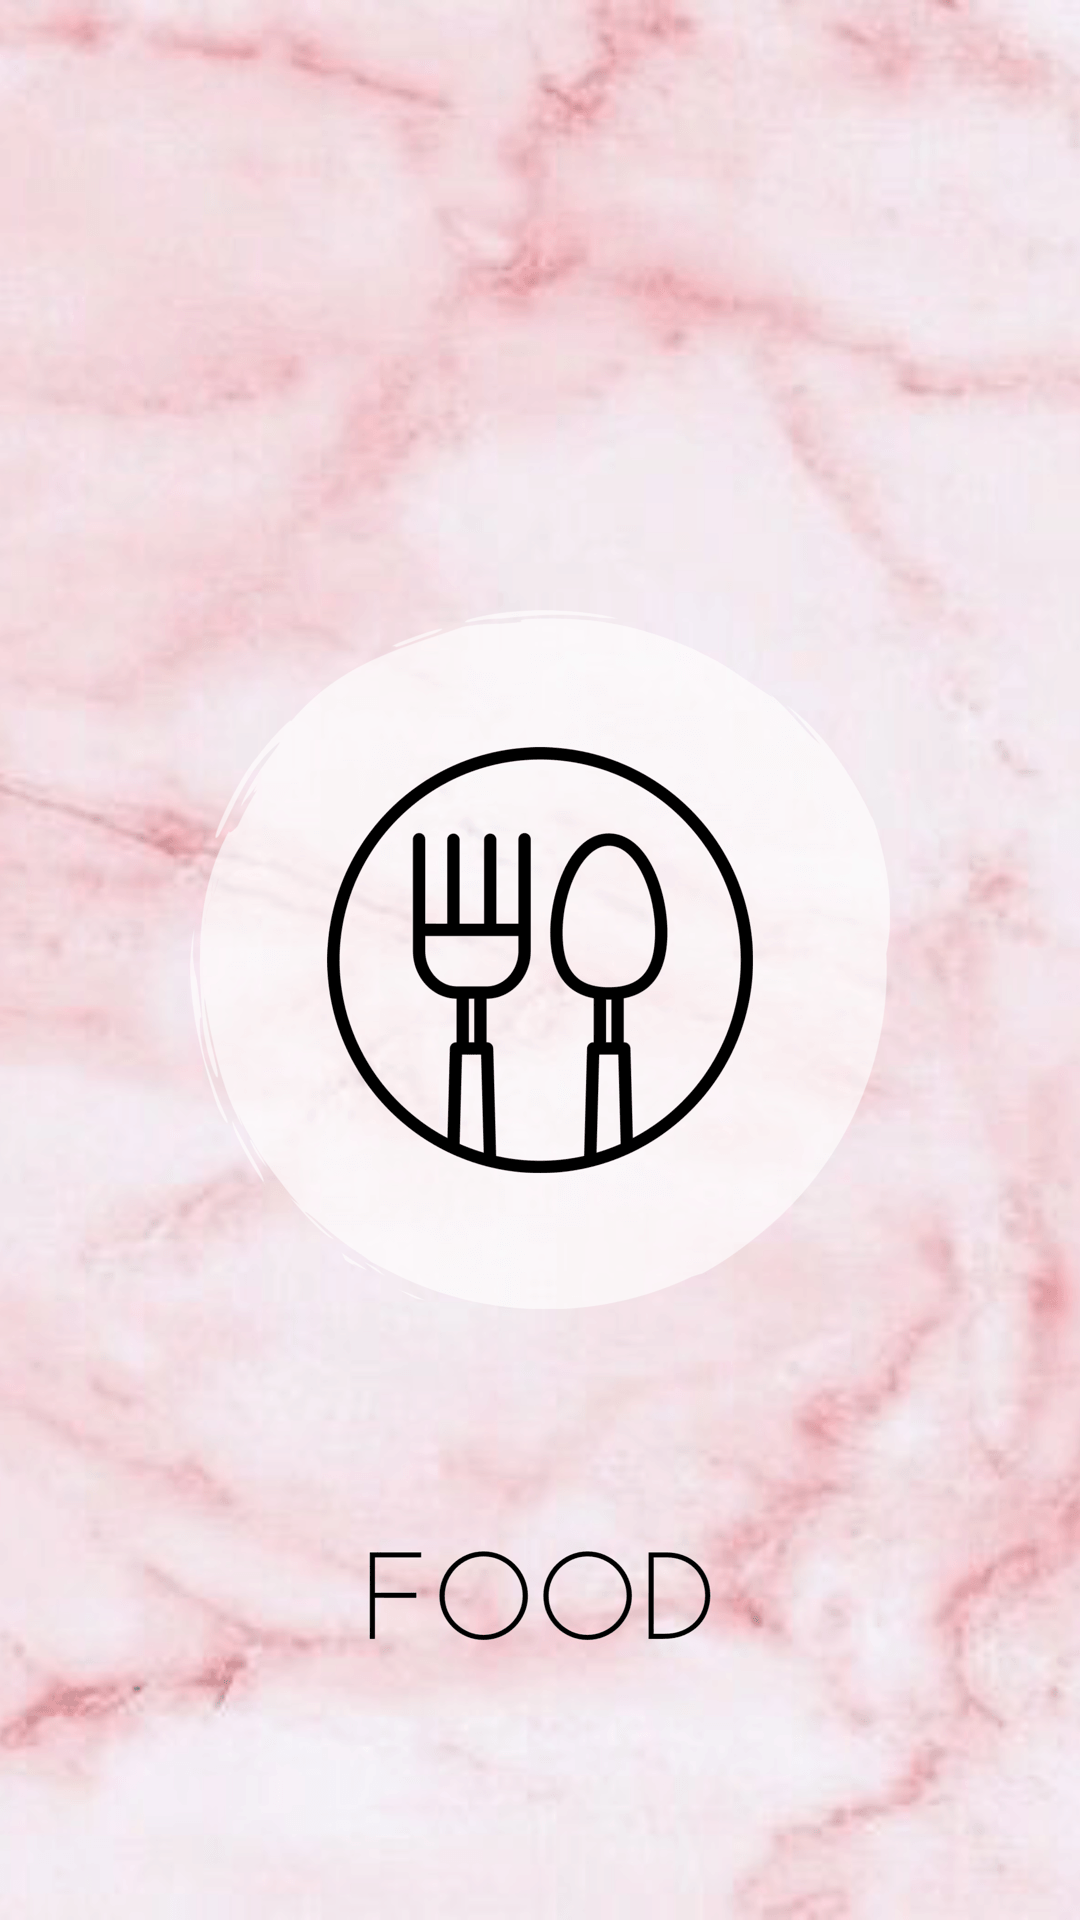 Instagram Instagram Logo - Highlight cover - Food Pink and Floral Theme. | Free Instagram ...